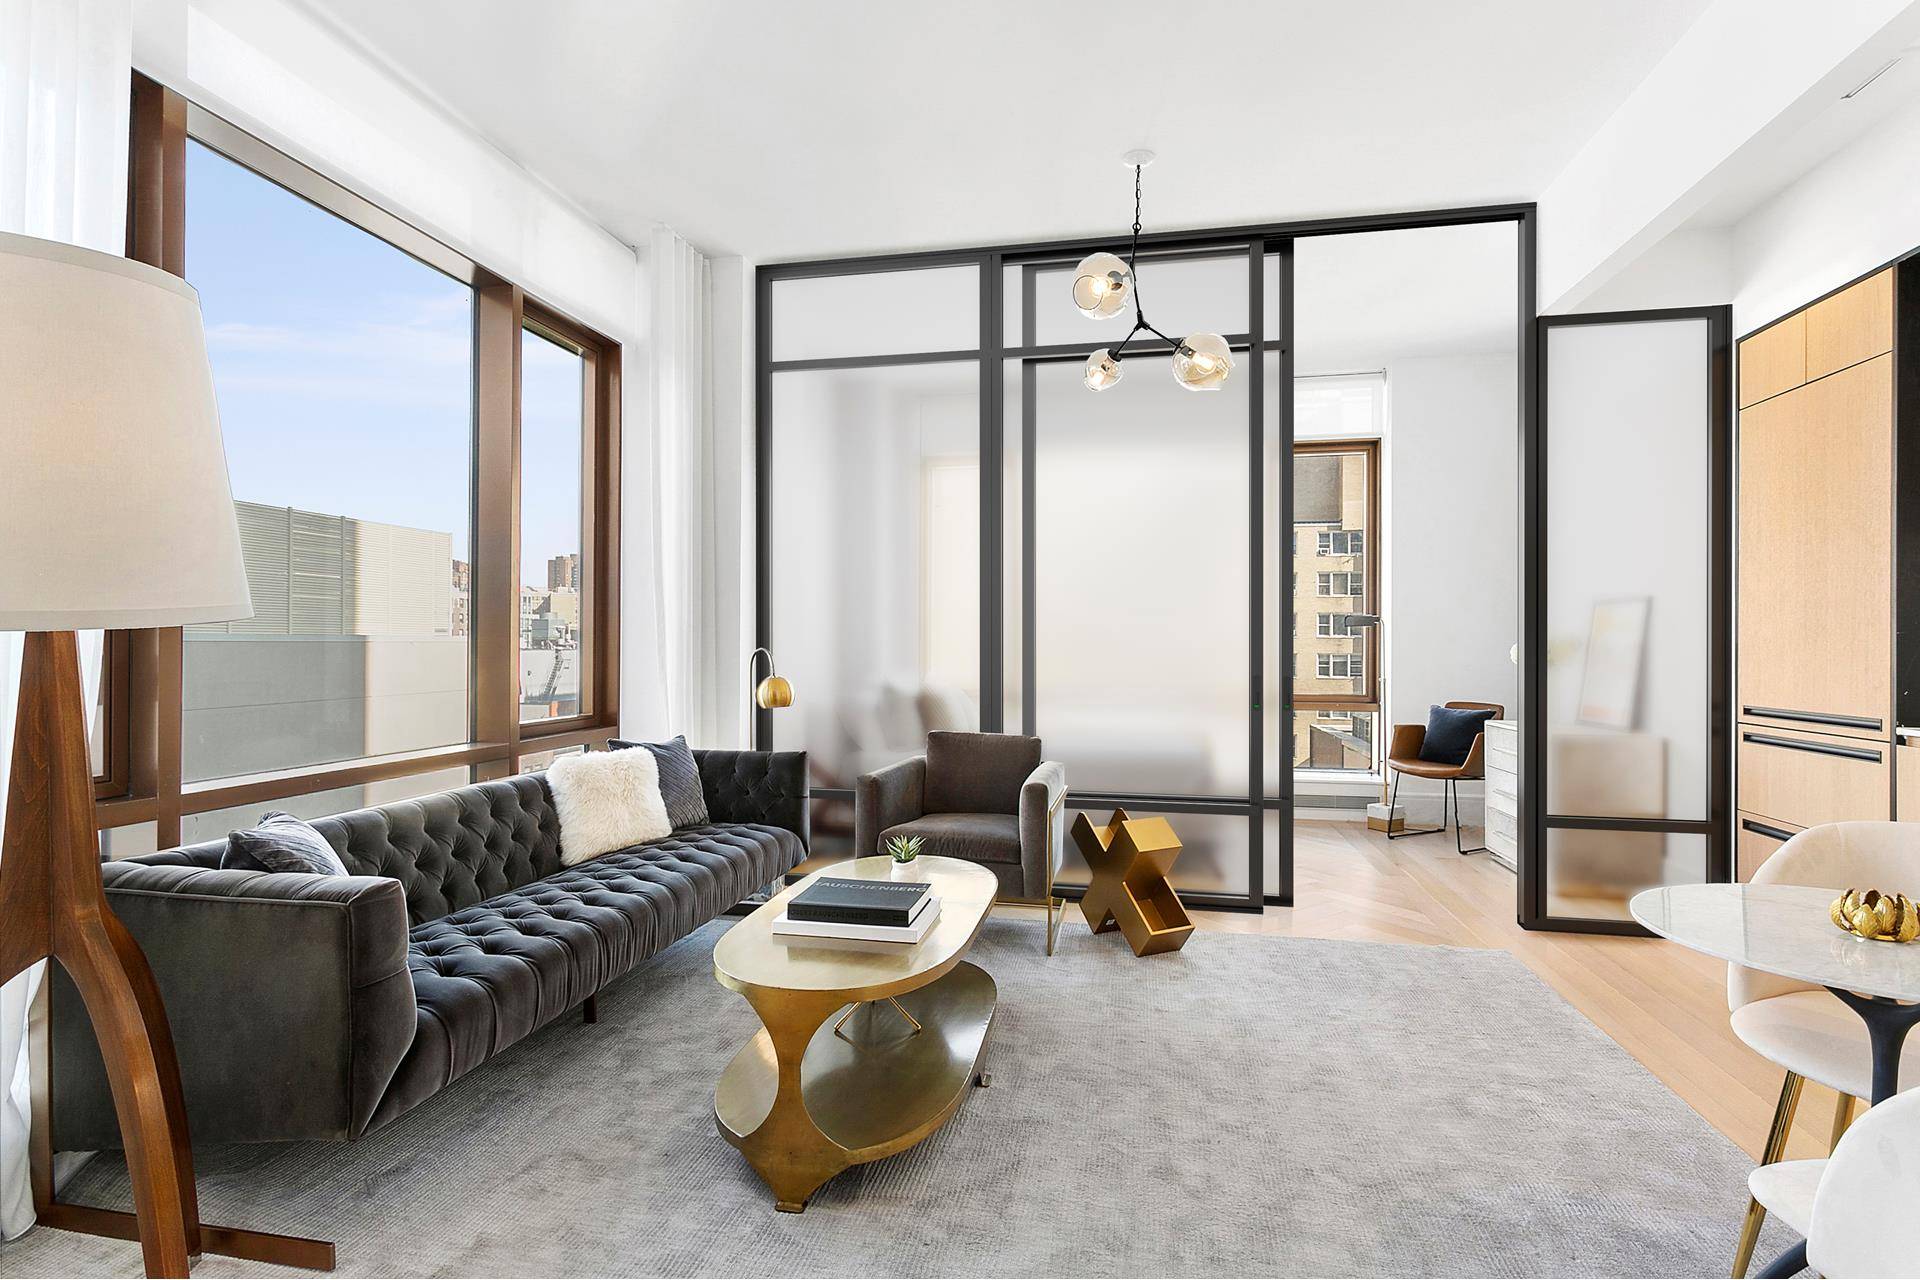 Available for Immediate Occupancy Residence 9F is a light filled loft studio convertible 1 bedroom residence with north and east exposure with open views to Midtown of the Chrysler Building.